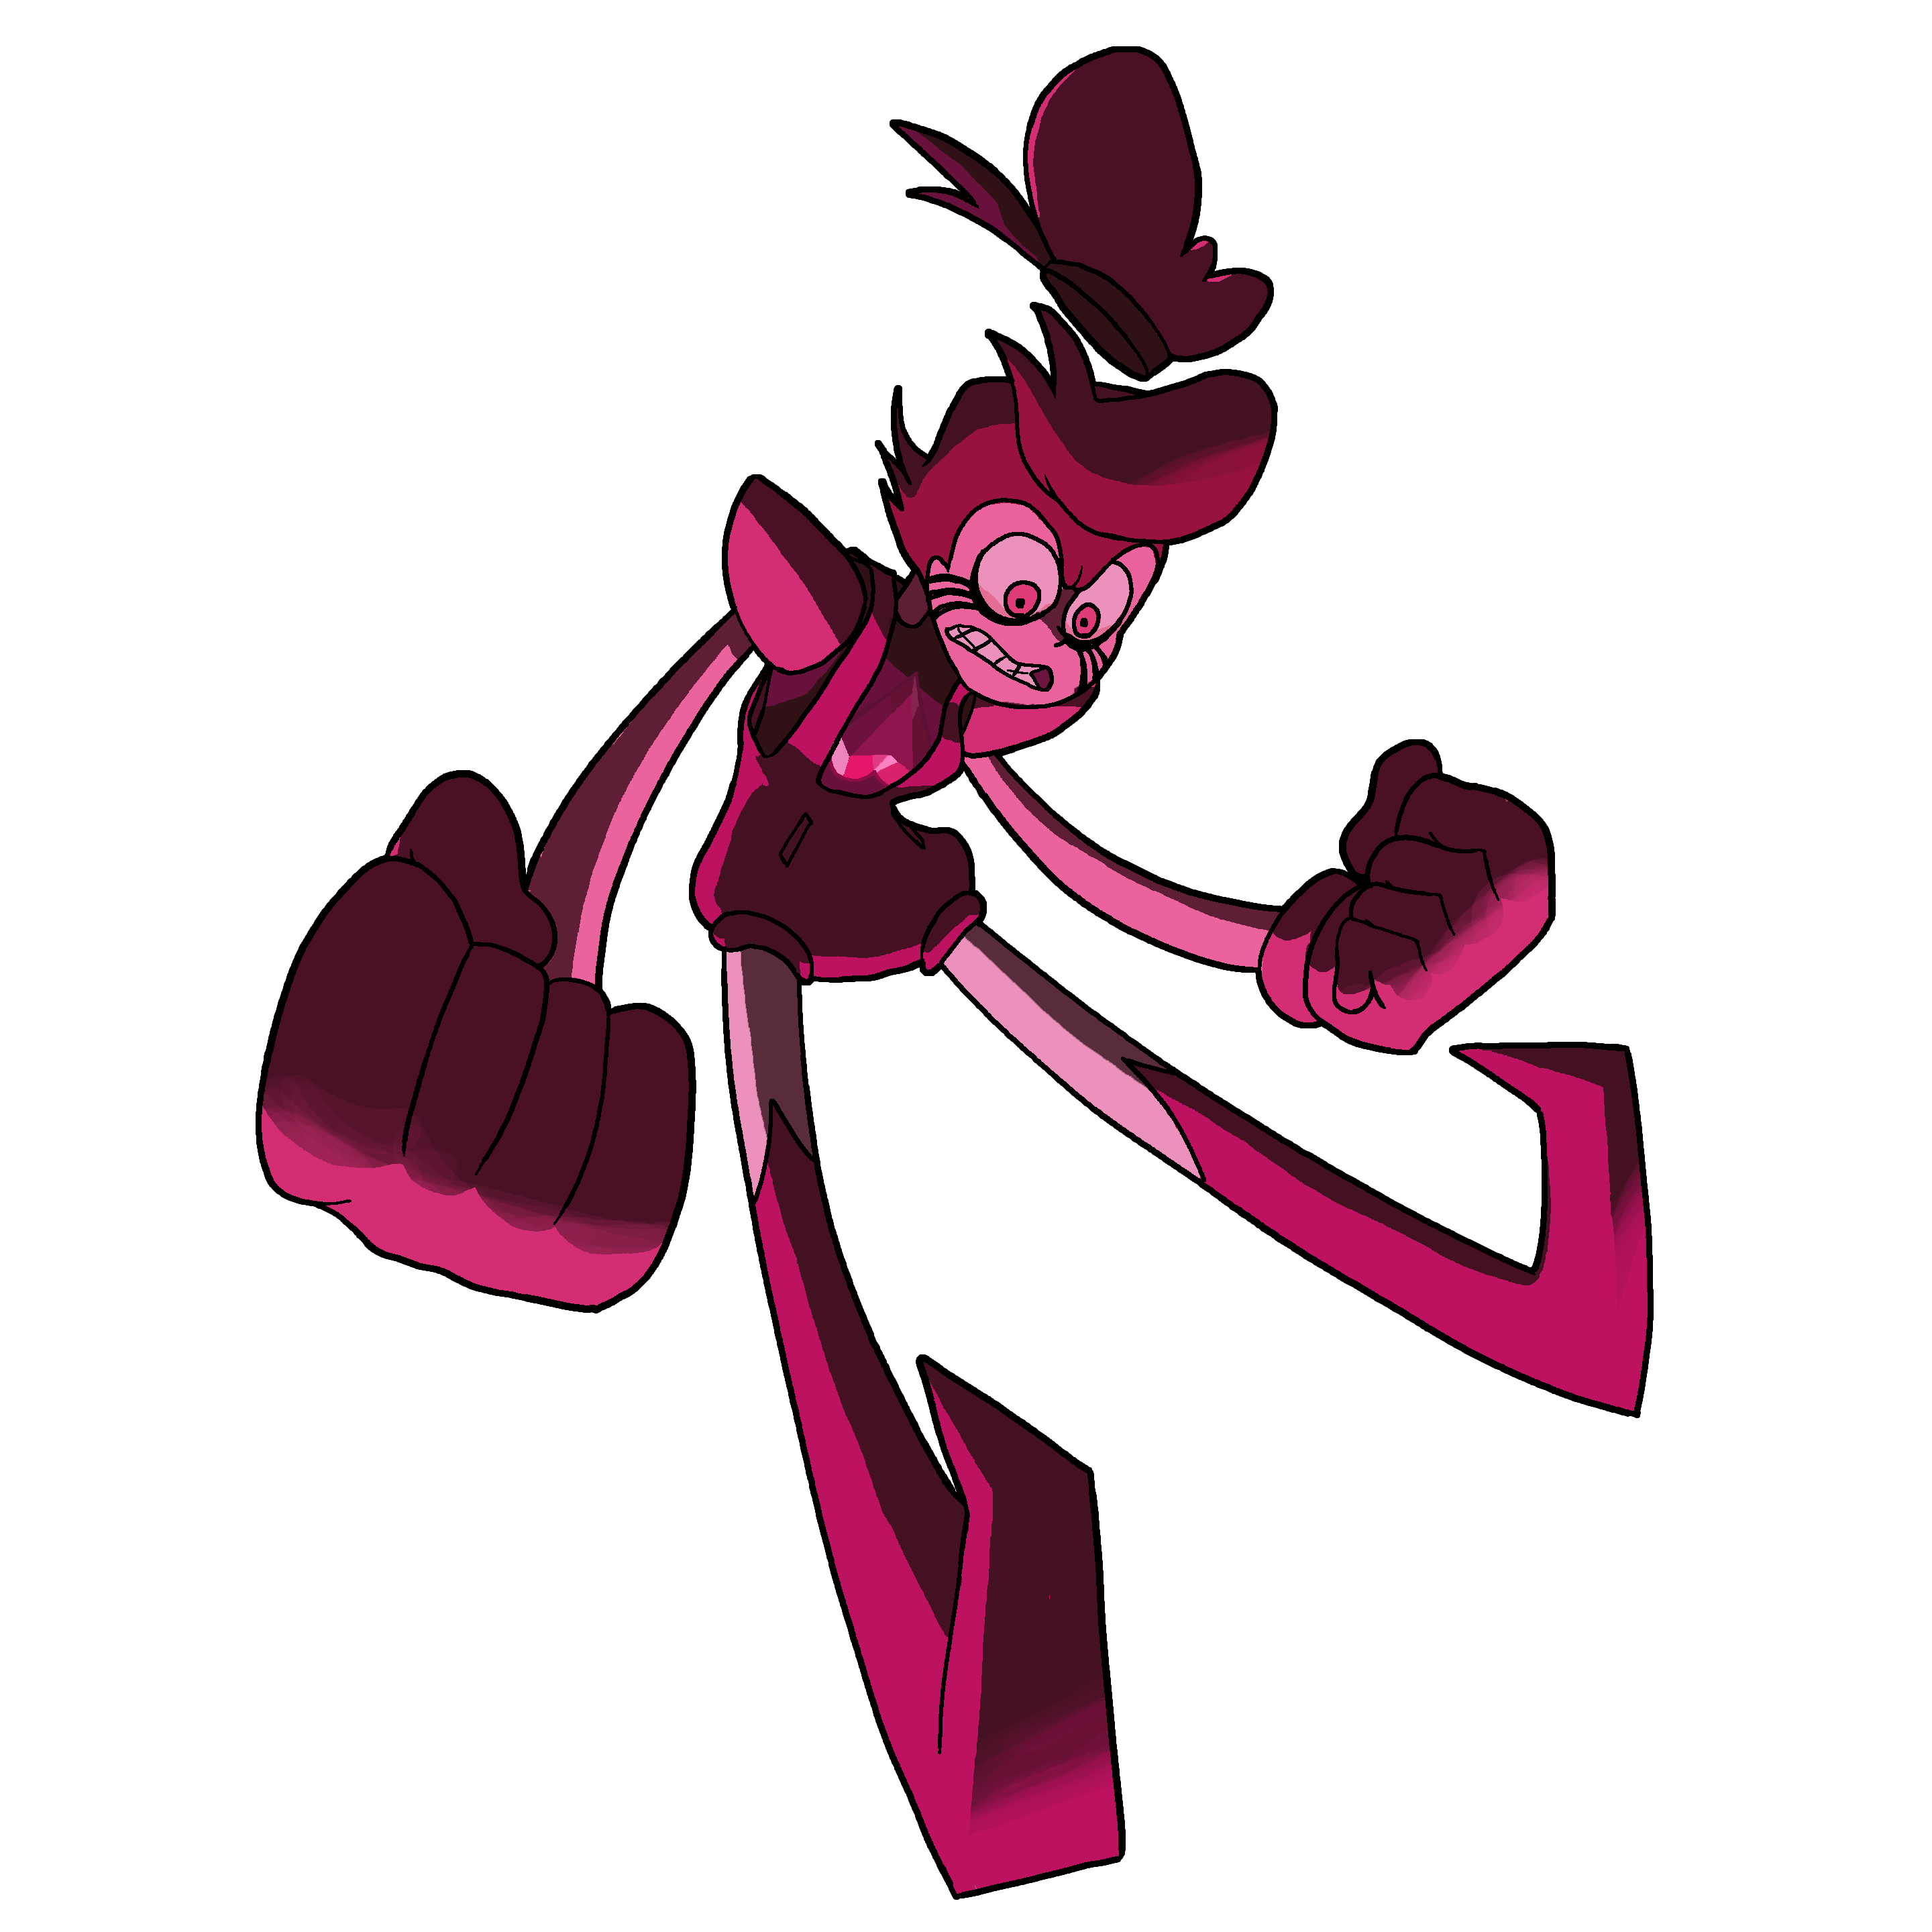 ann boyette share images of spinel from steven universe photos